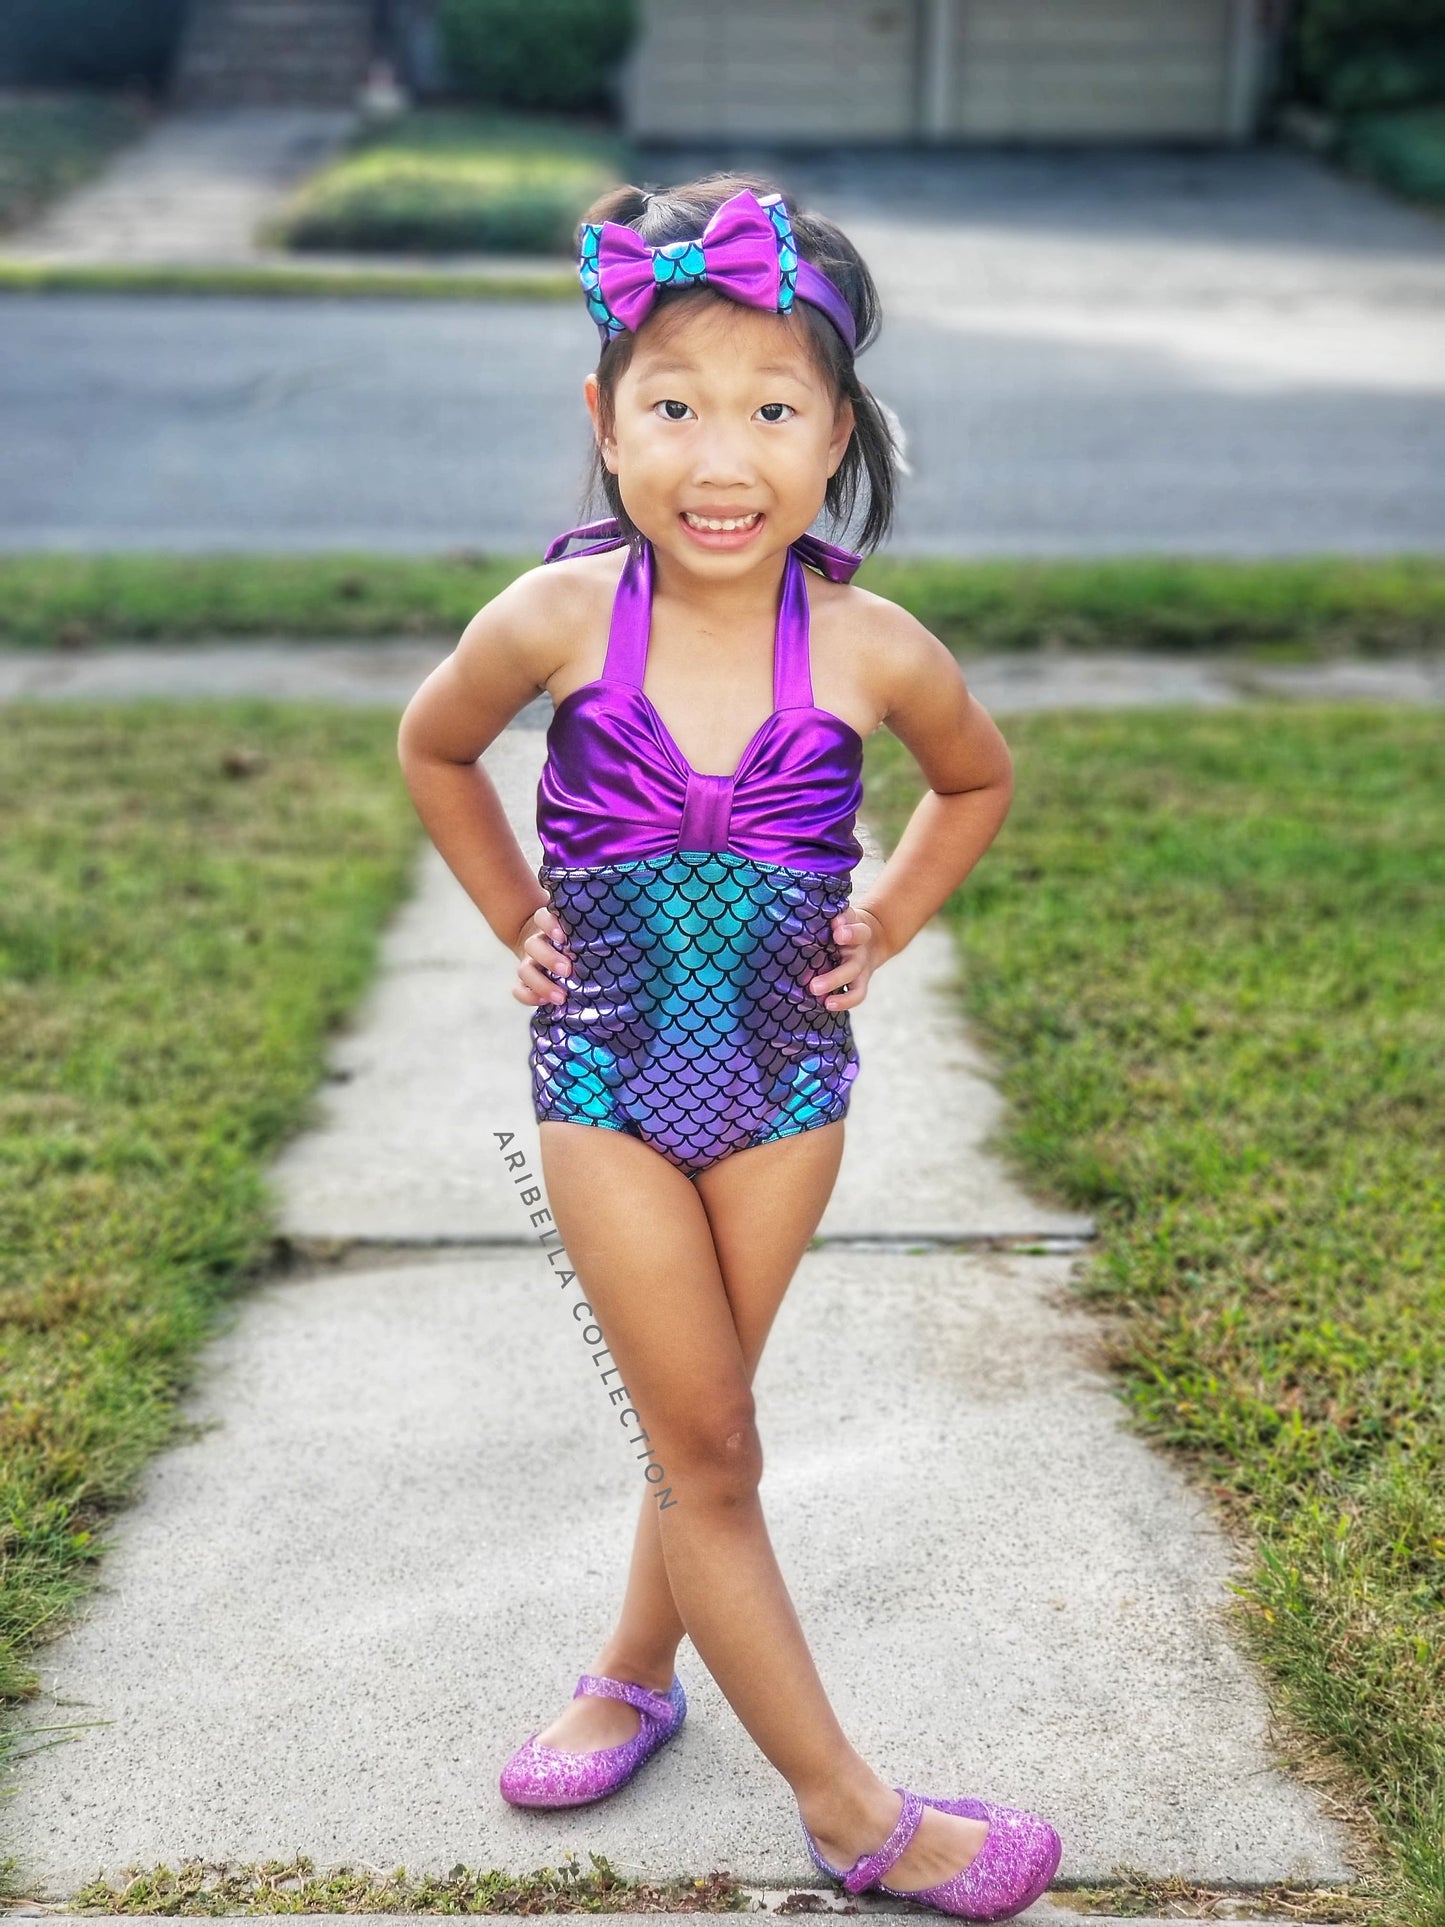 Mermaid Skirt & One Piece Swimsuit Outfit - Iridescent, Green, or Aqua - Aribella Collection, Inc.